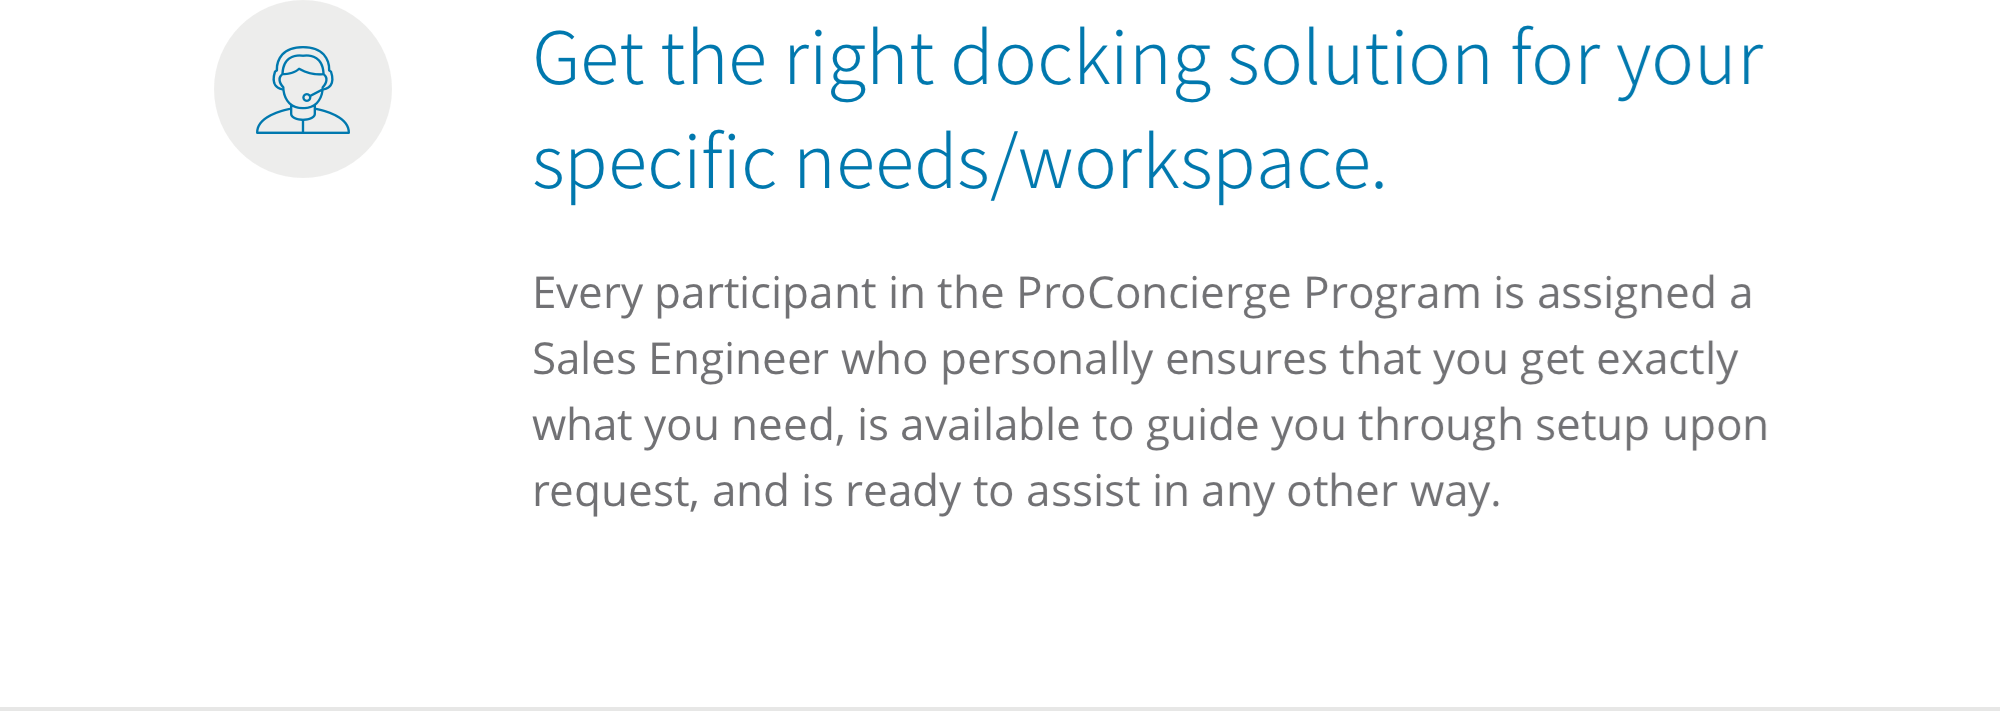 Get the right docking solution for your specific needs